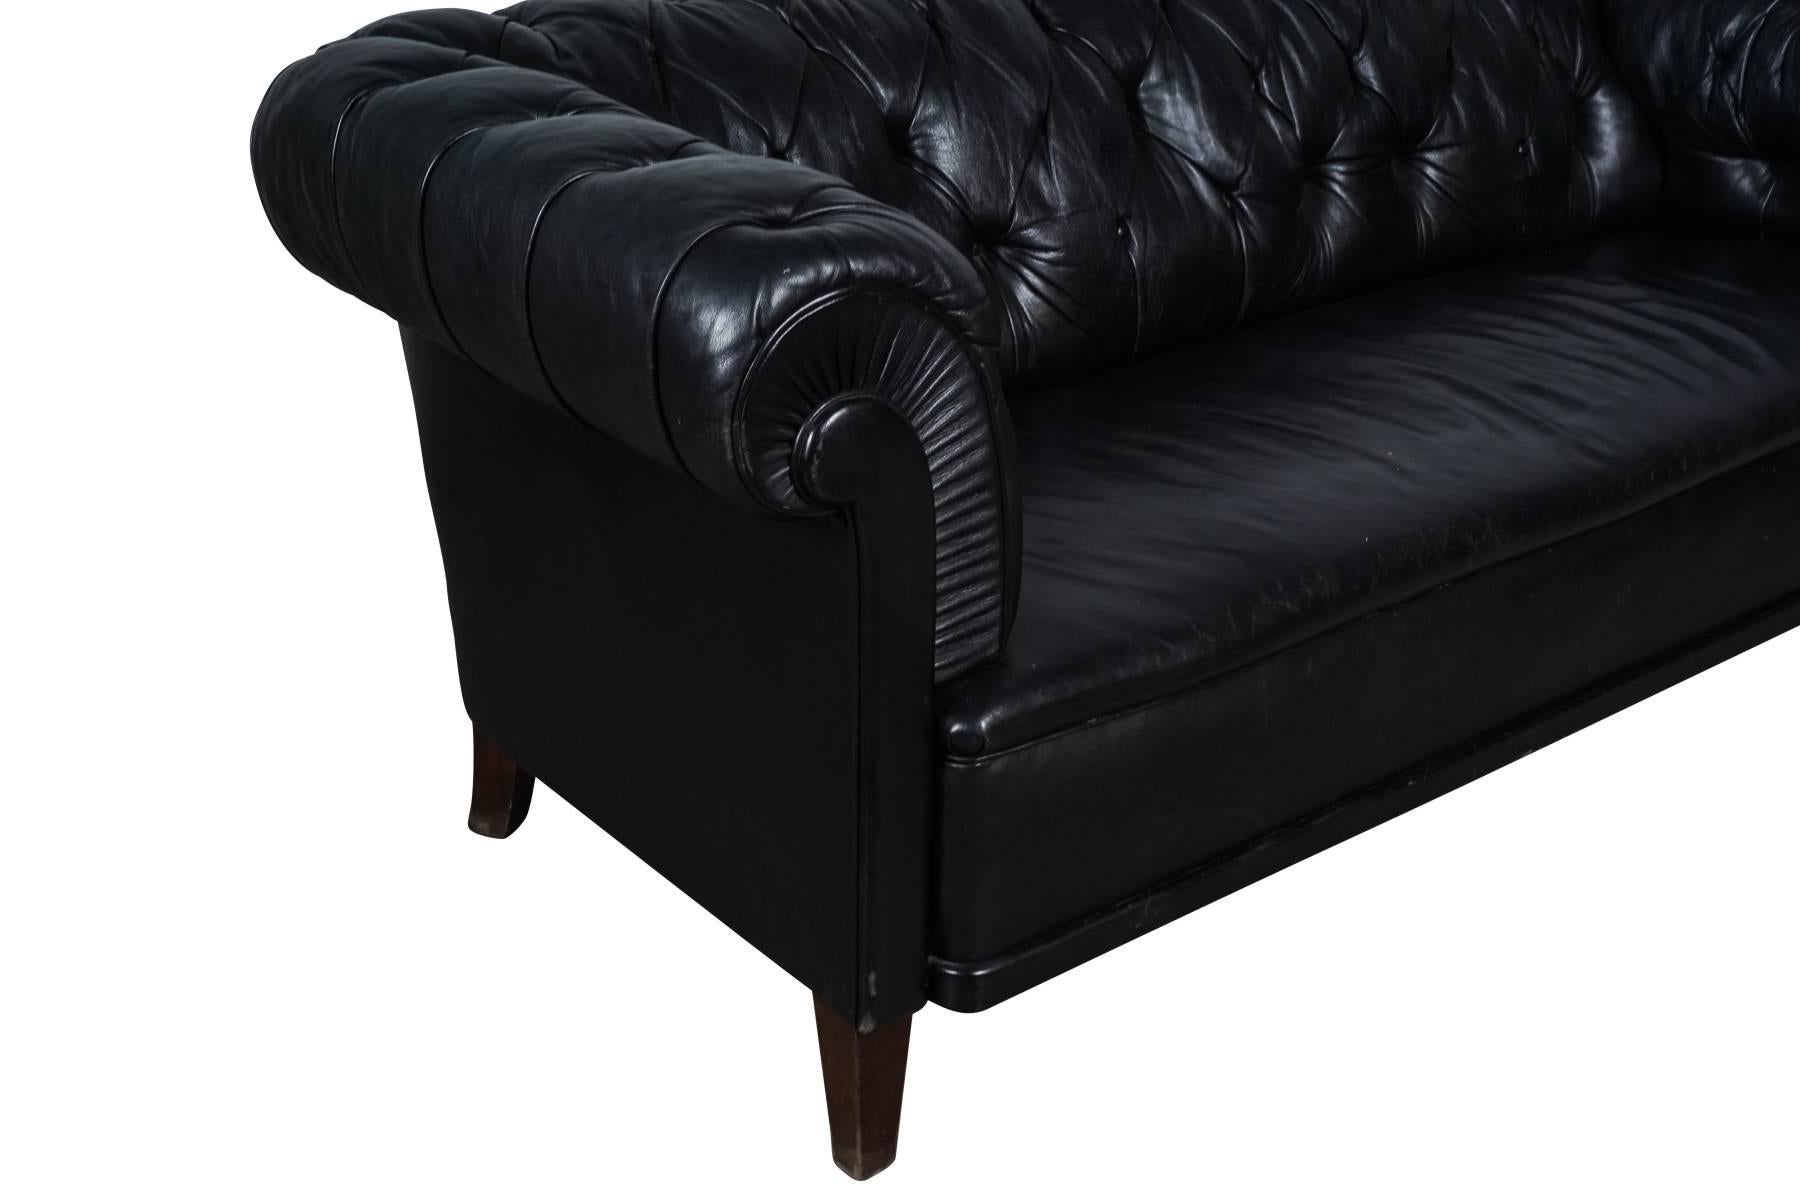 Vintage black leather Chesterfield sofa. Great patina and wear.